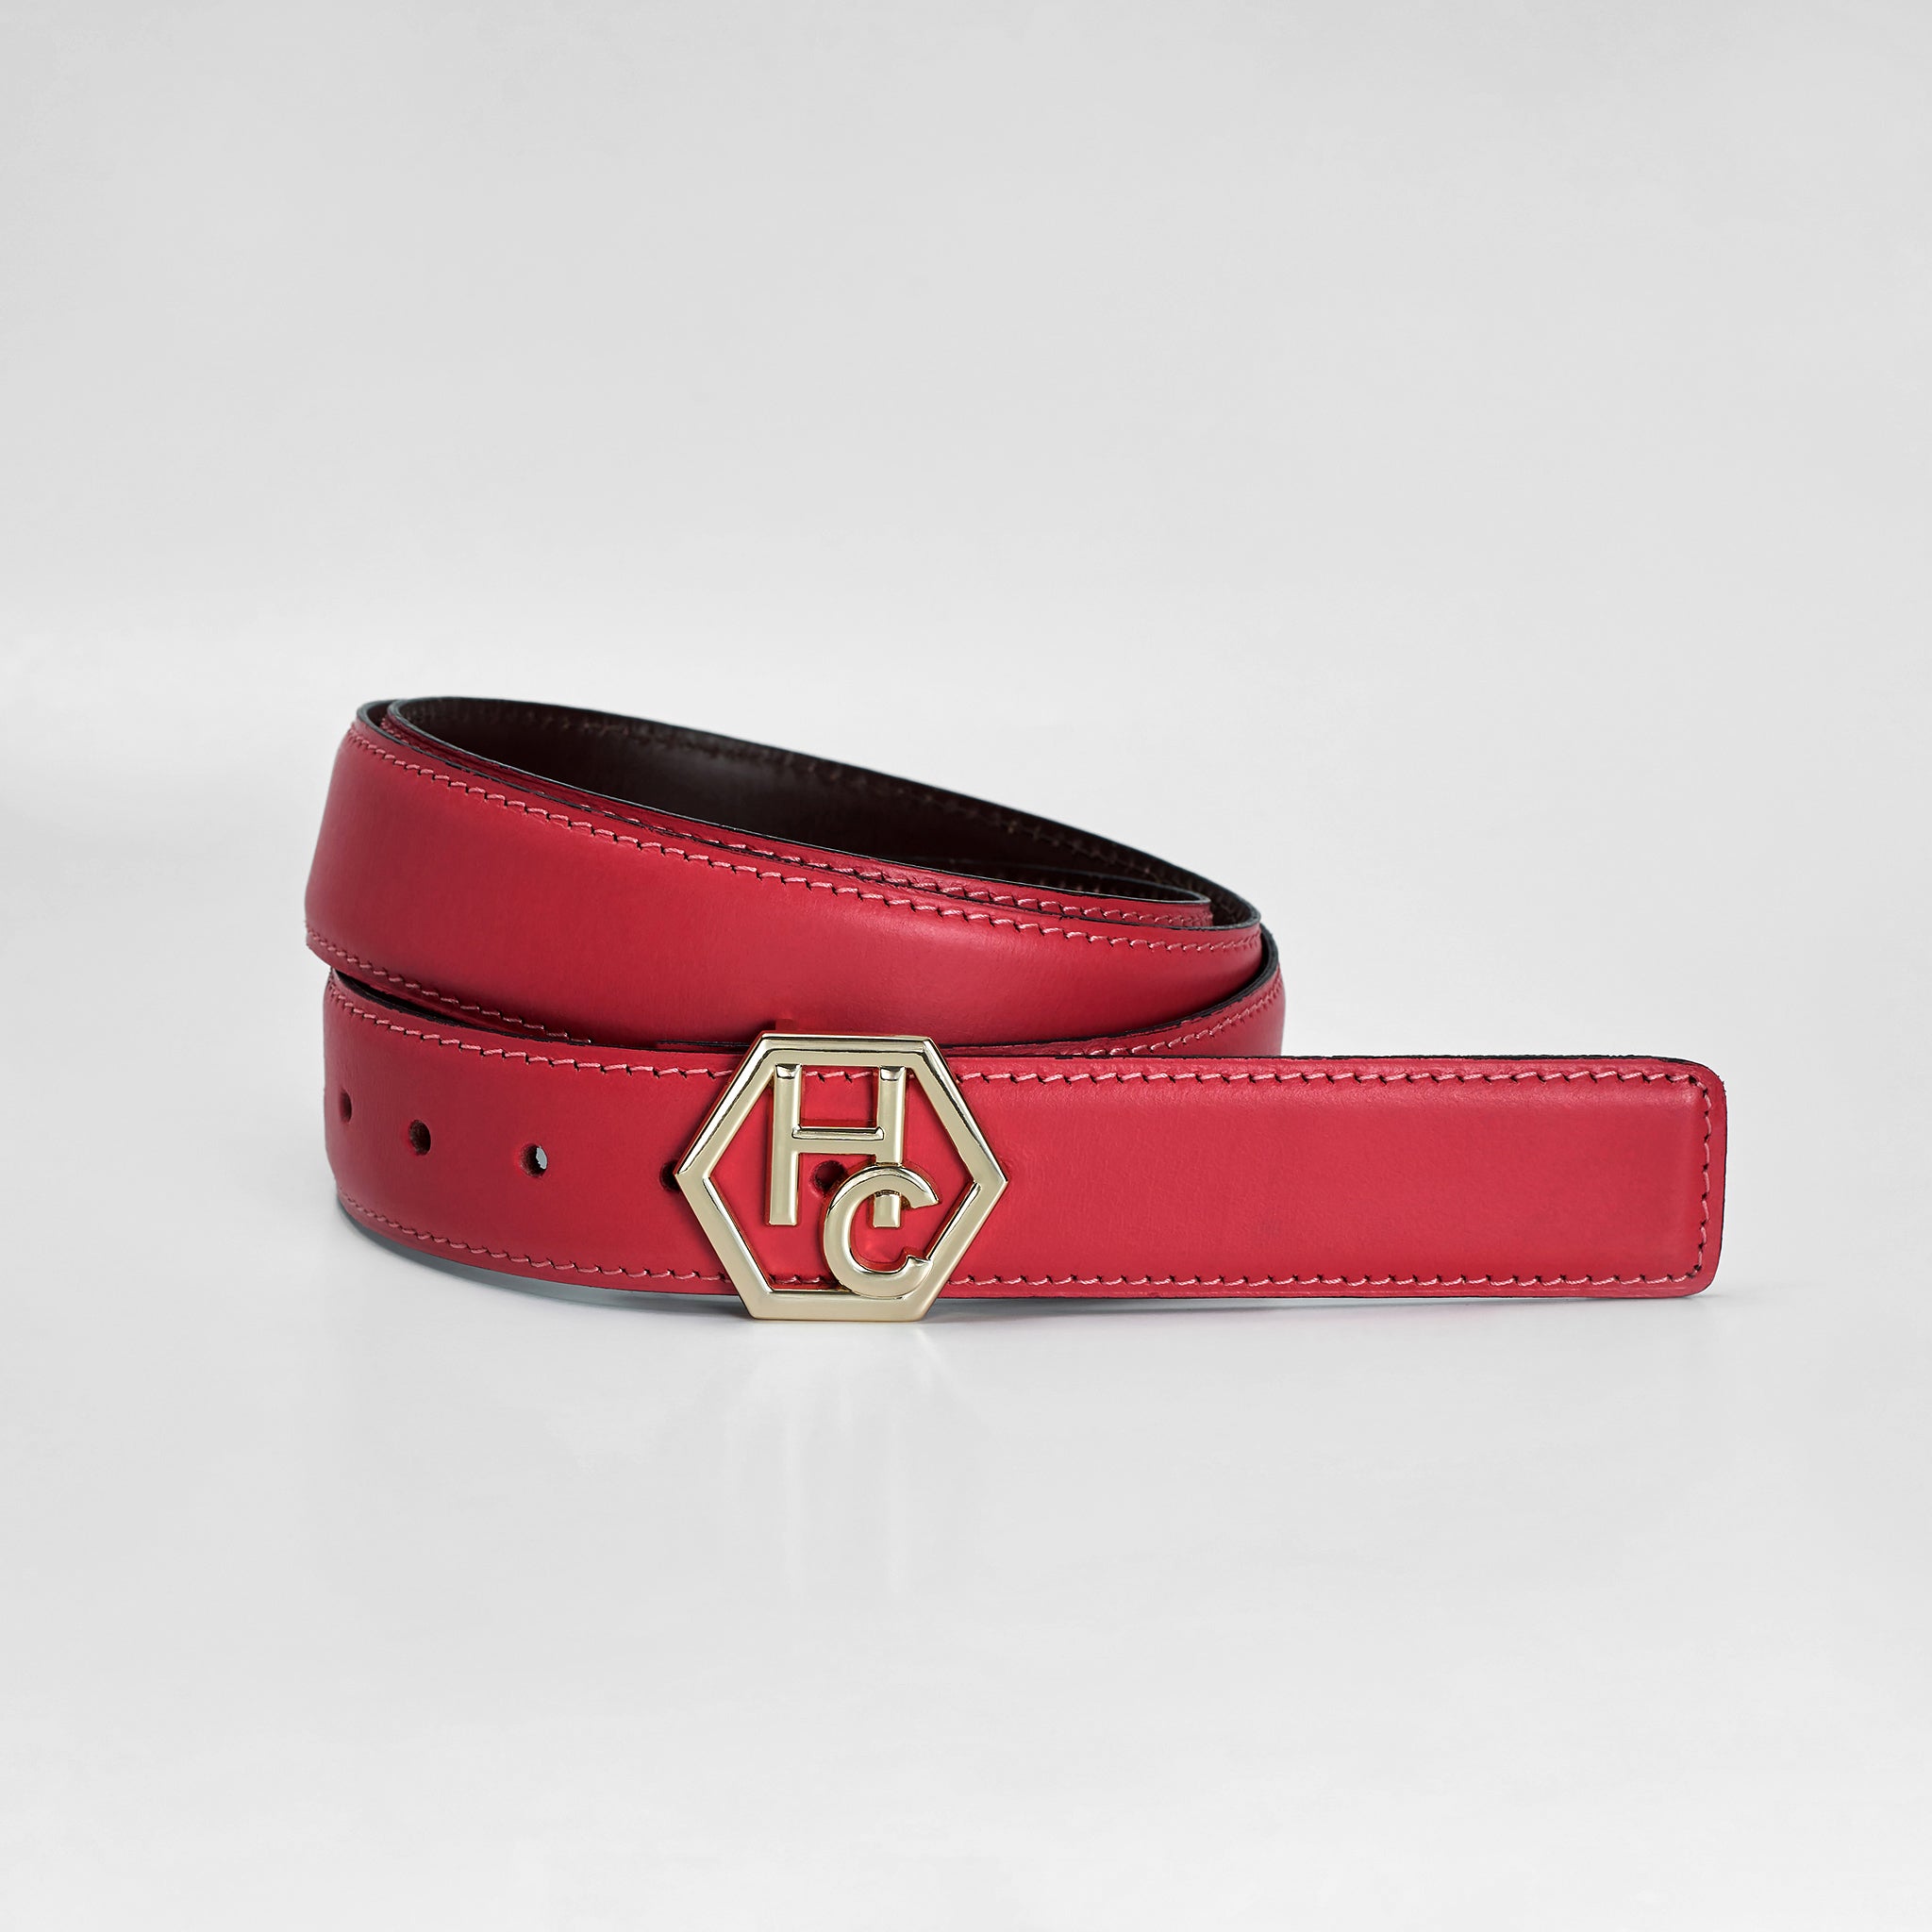 Hedonist Chicago Reversible Pink Red Leather Belt 1.3" 32378868531351